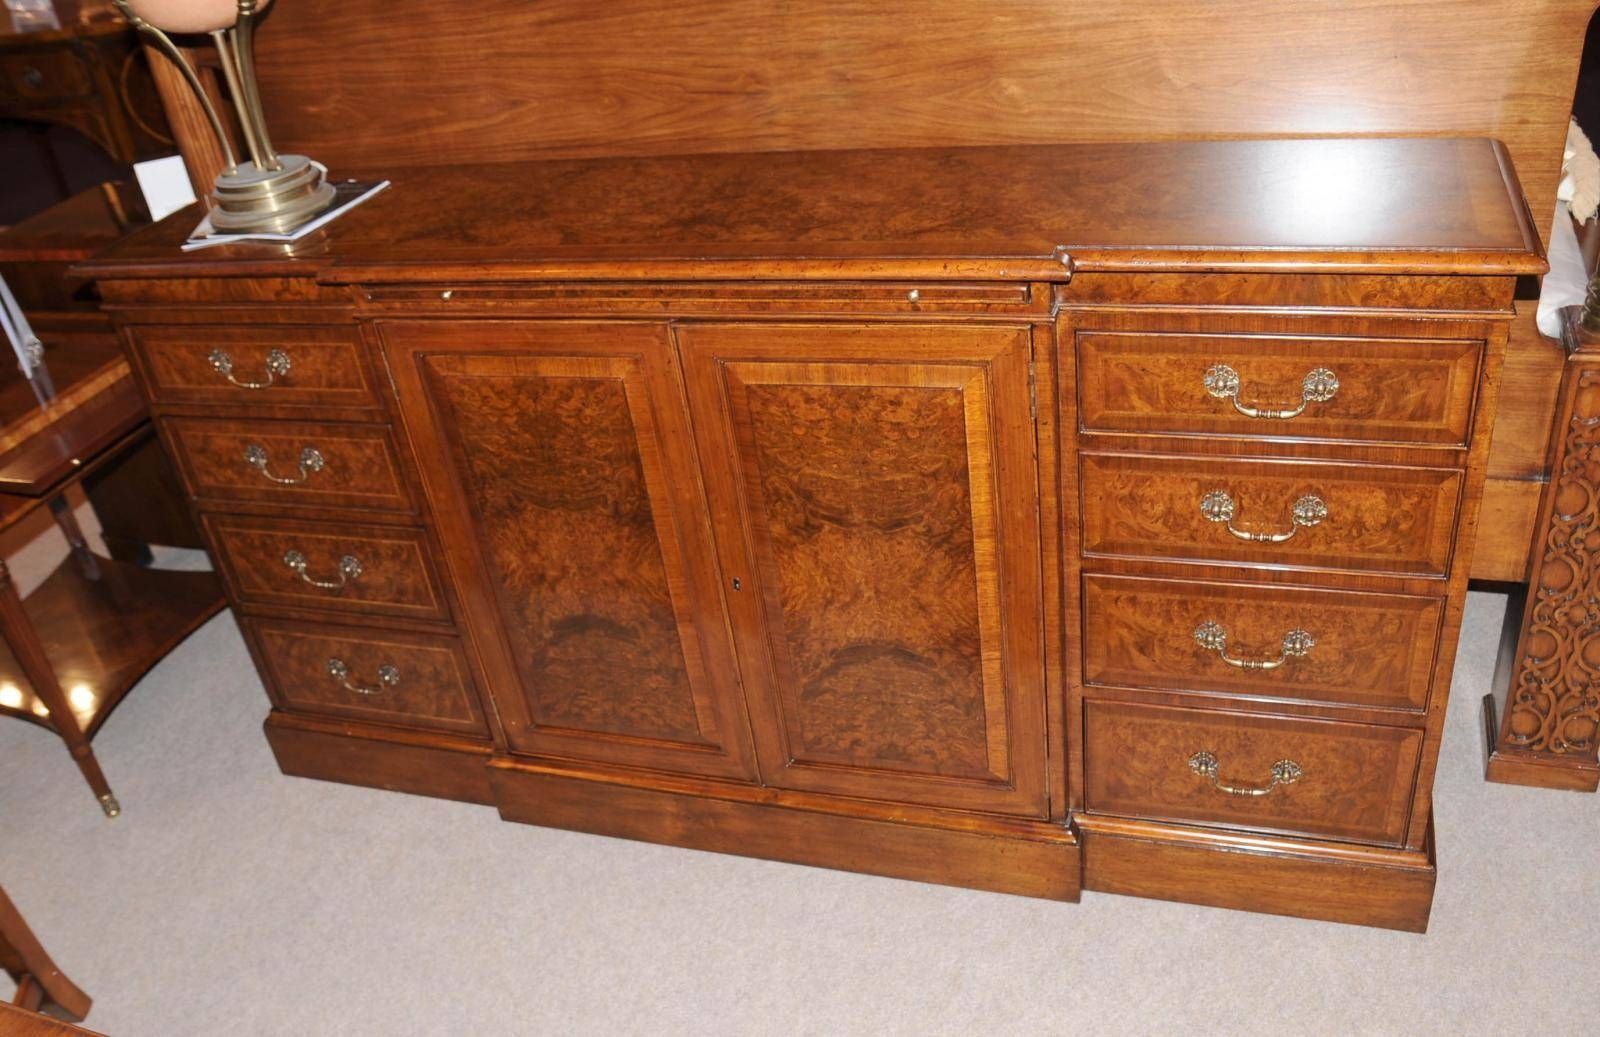 Edwardian Walnut Sideboard Buffet Server Dining Furniture | Ebay Intended For Buffet Server Sideboards (View 3 of 15)